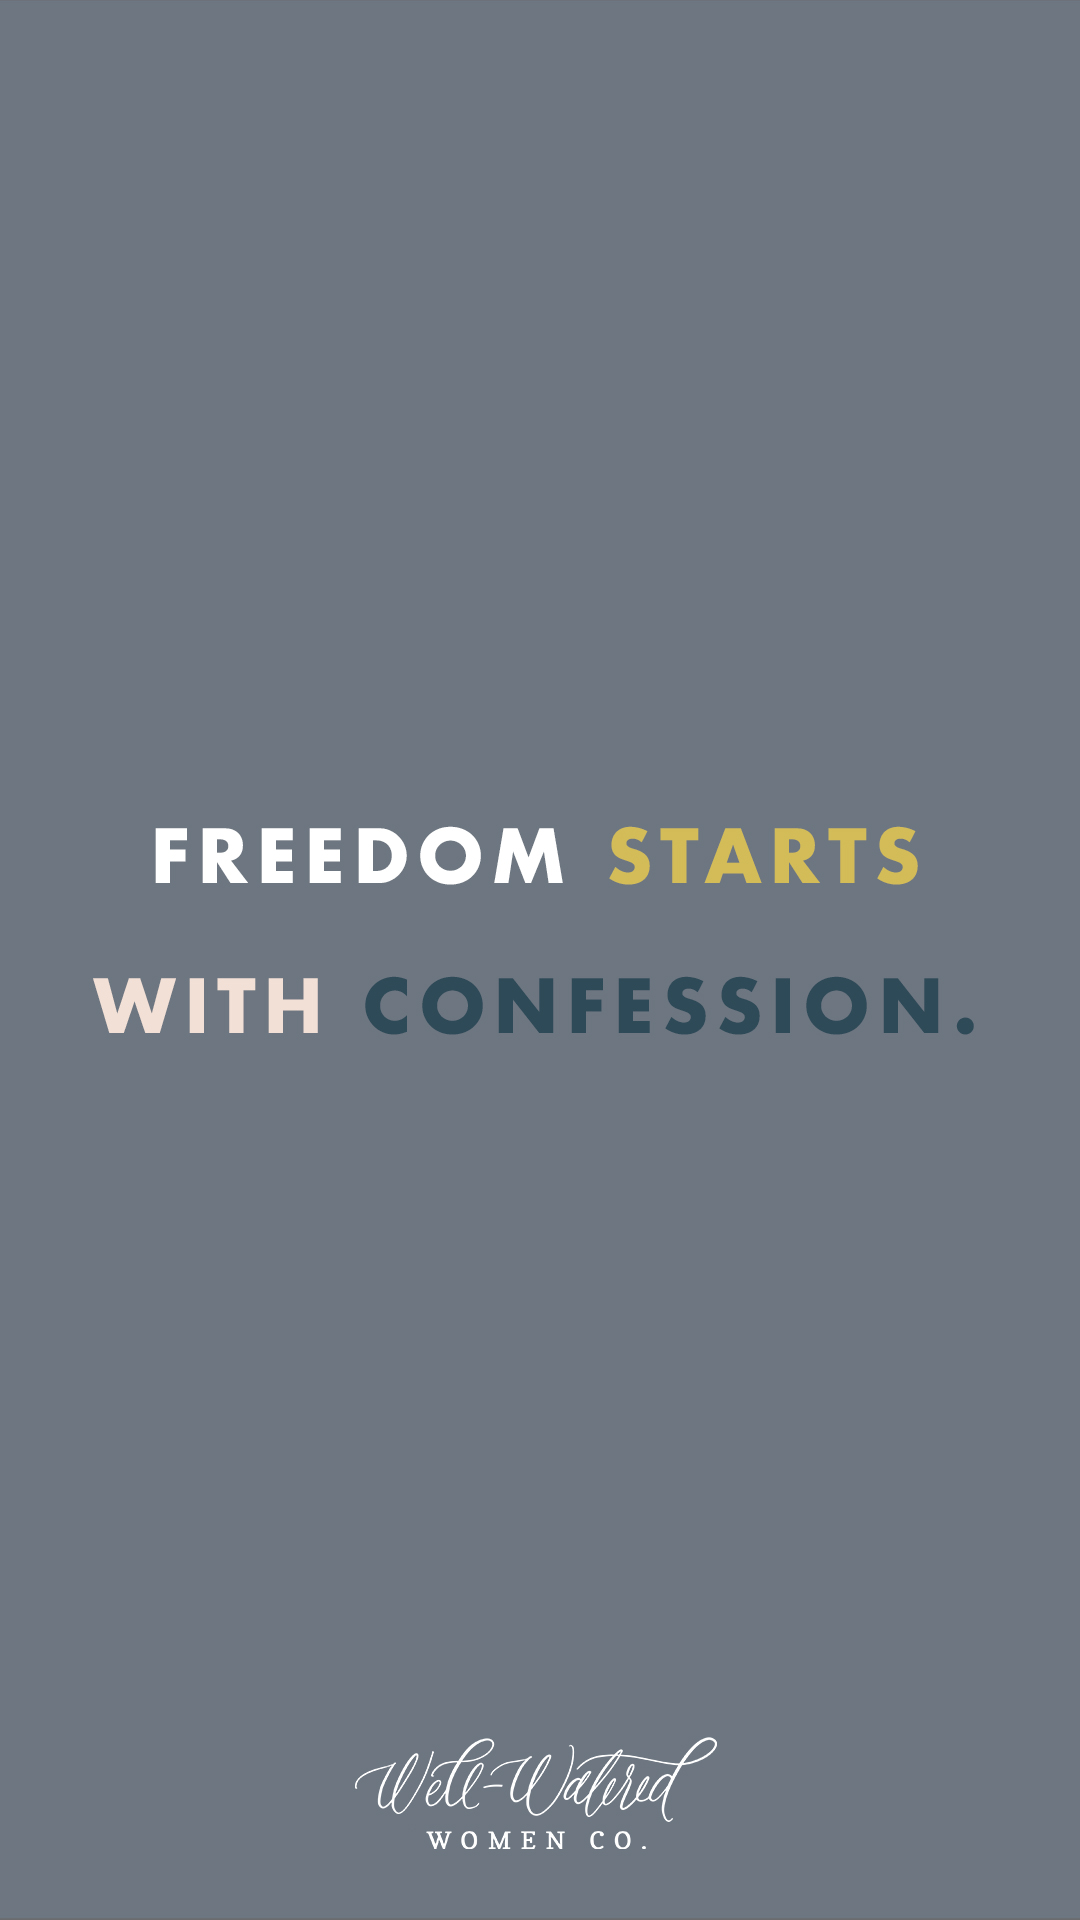 Well-Watered Women | Behind Closed Doors-Confessing Sexual Sin | Freedom Starts with Confession